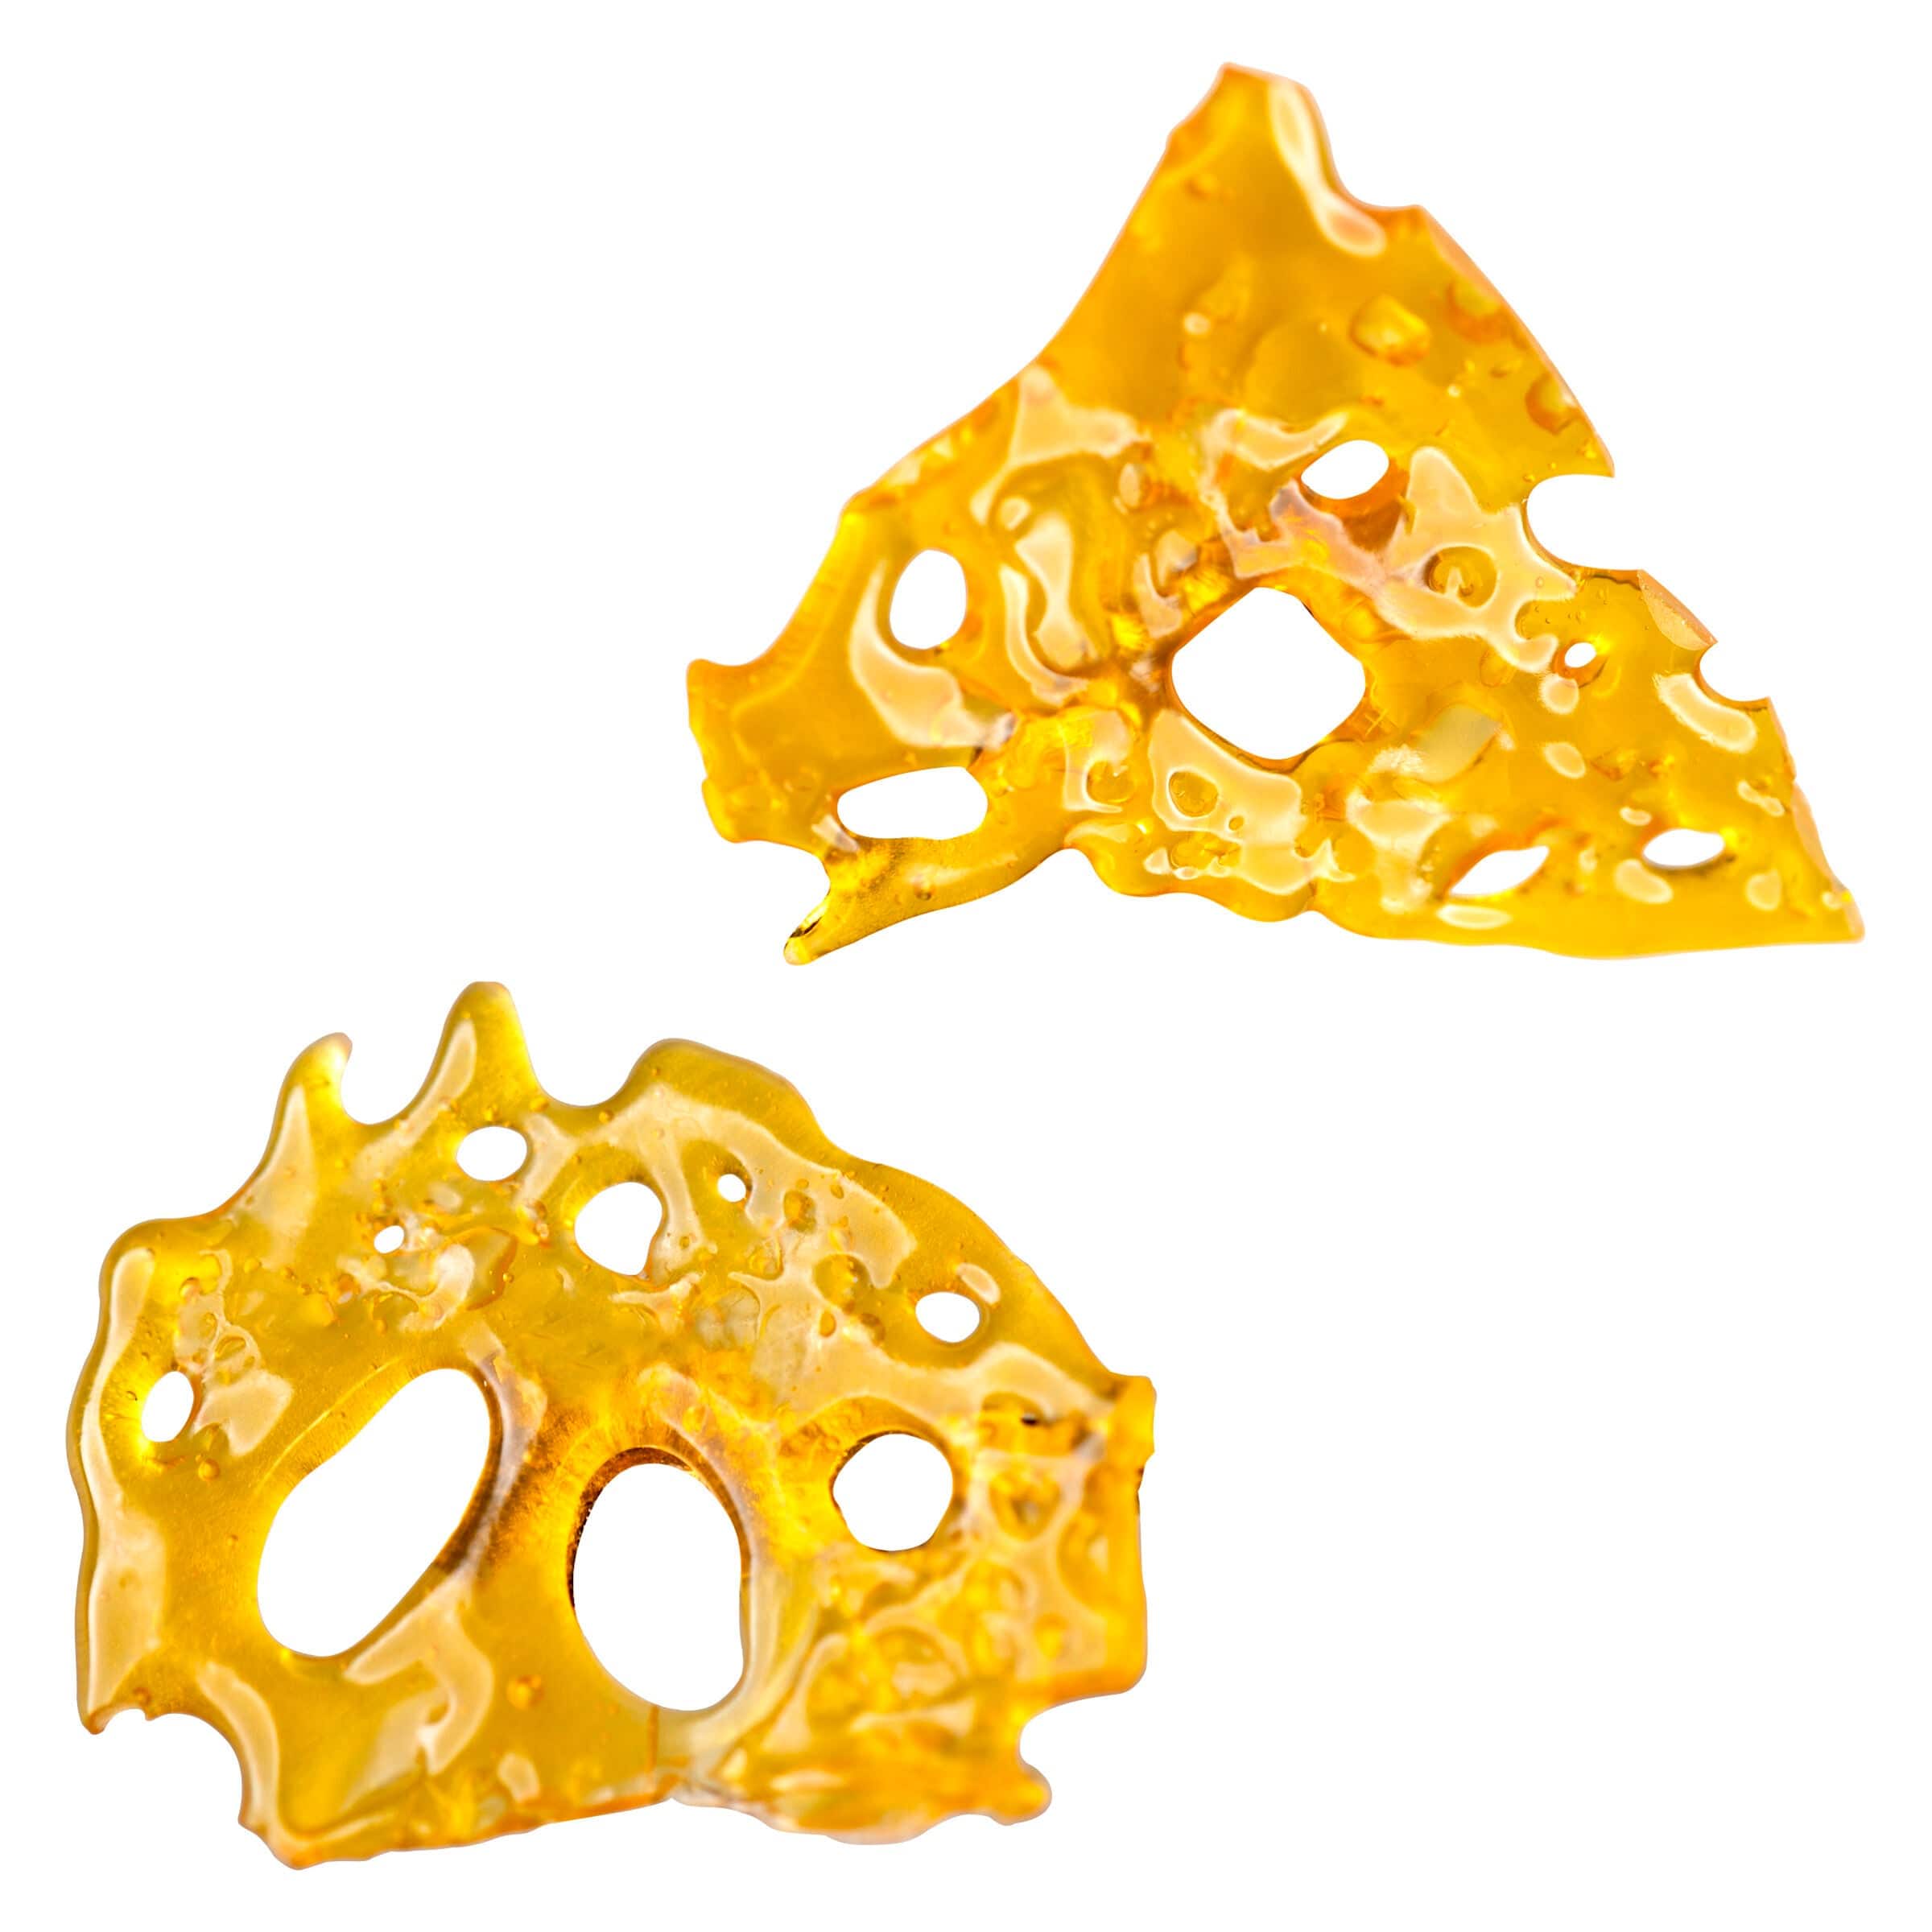 Dymond Concentrates 2.0 1.2g Shatters